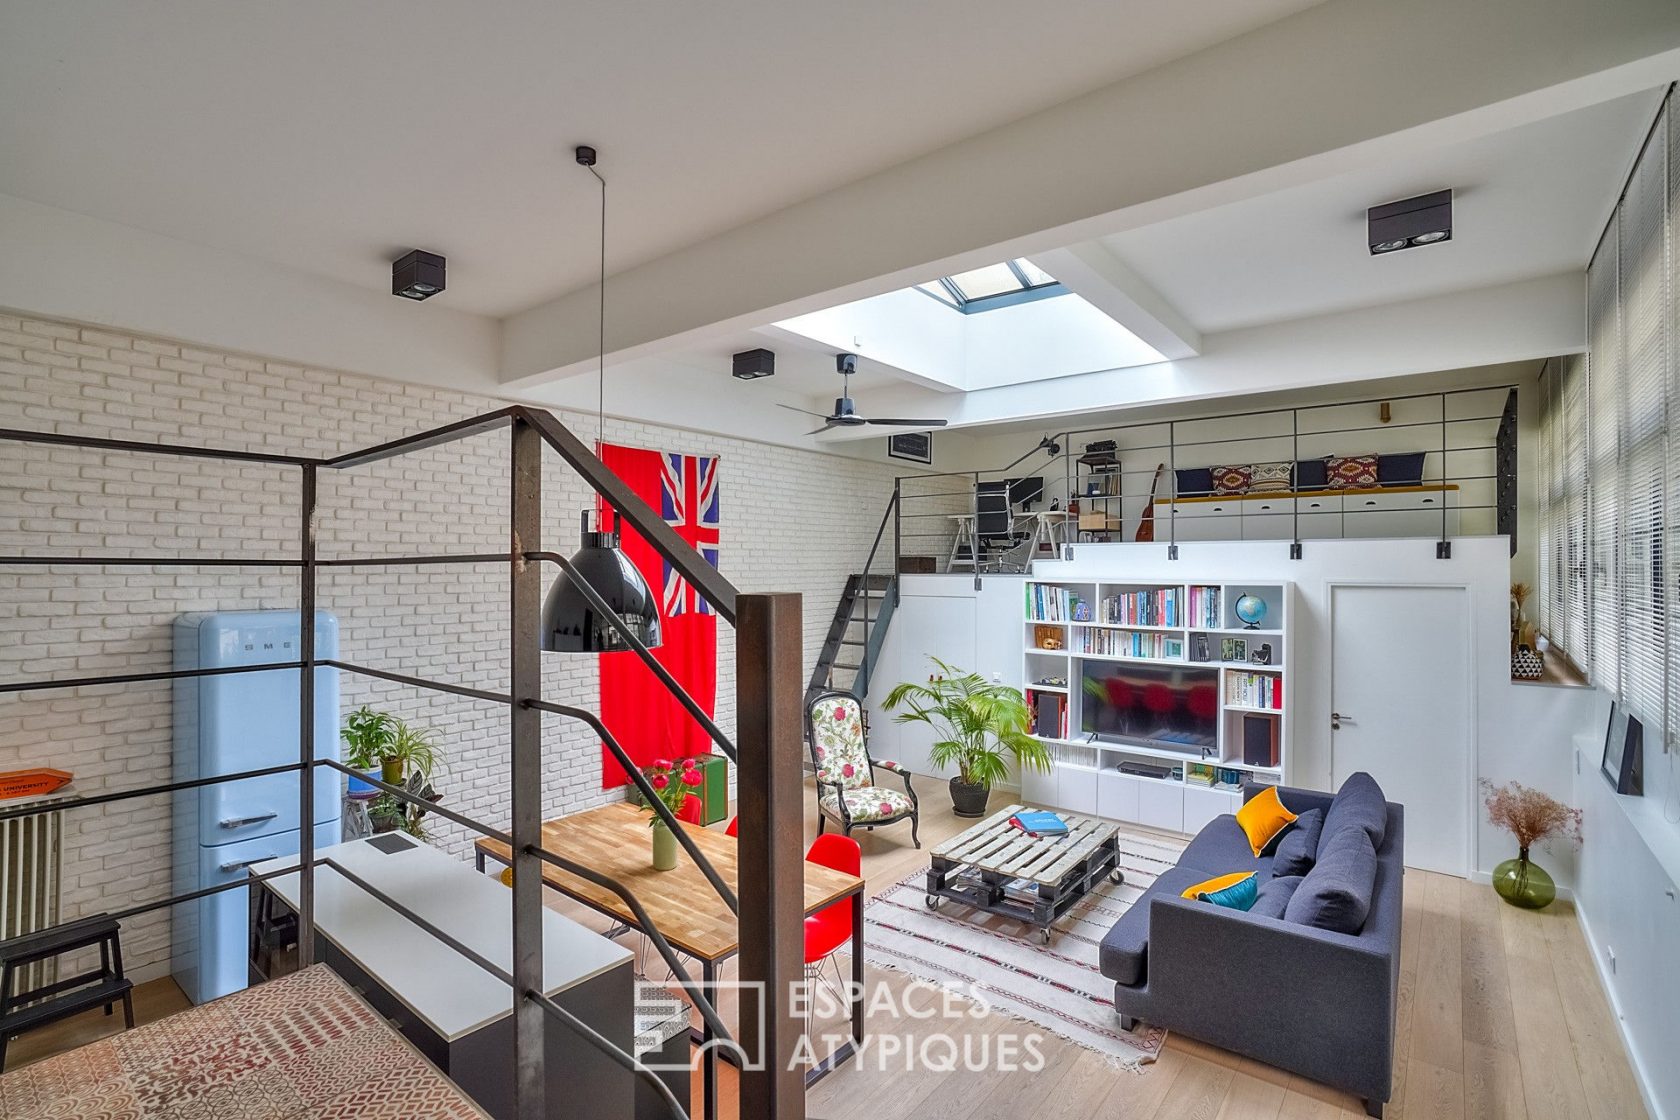 Former photo studio revisited in contemporary loft